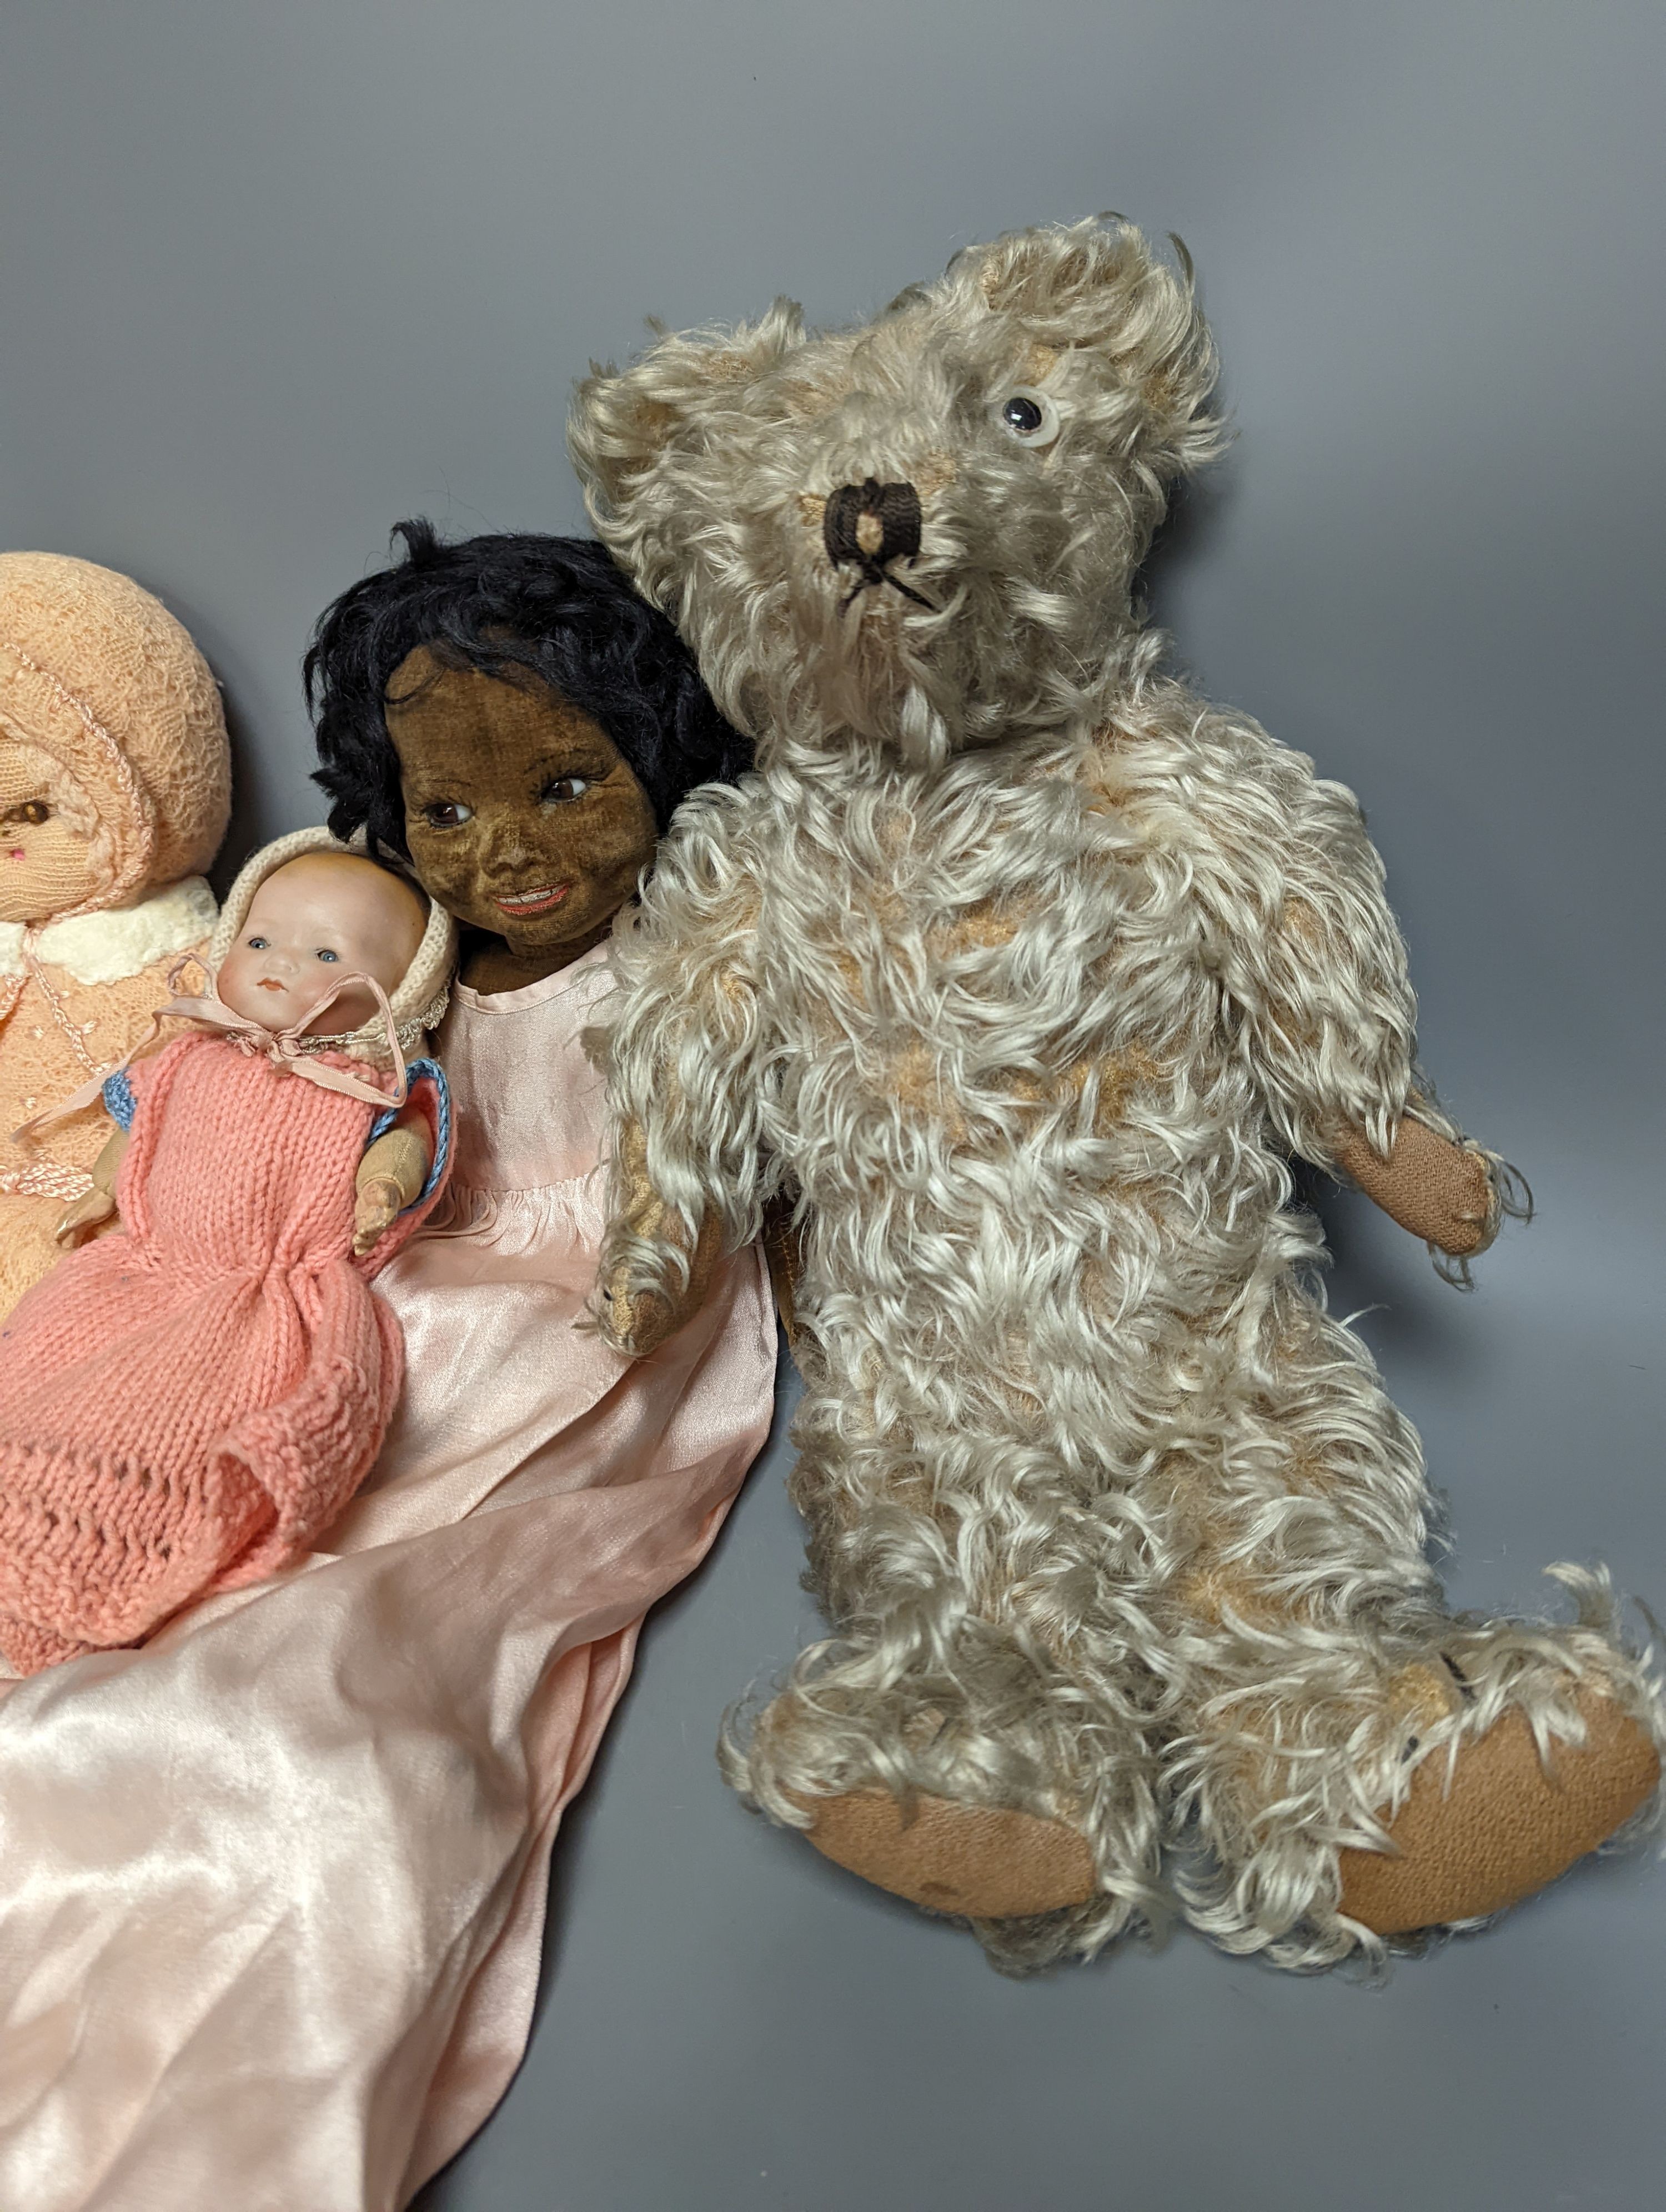 A Nora Wellings type mulatto doll and an Armmand Marseille doll 341, teddy etc, mulatto doll 43cms high